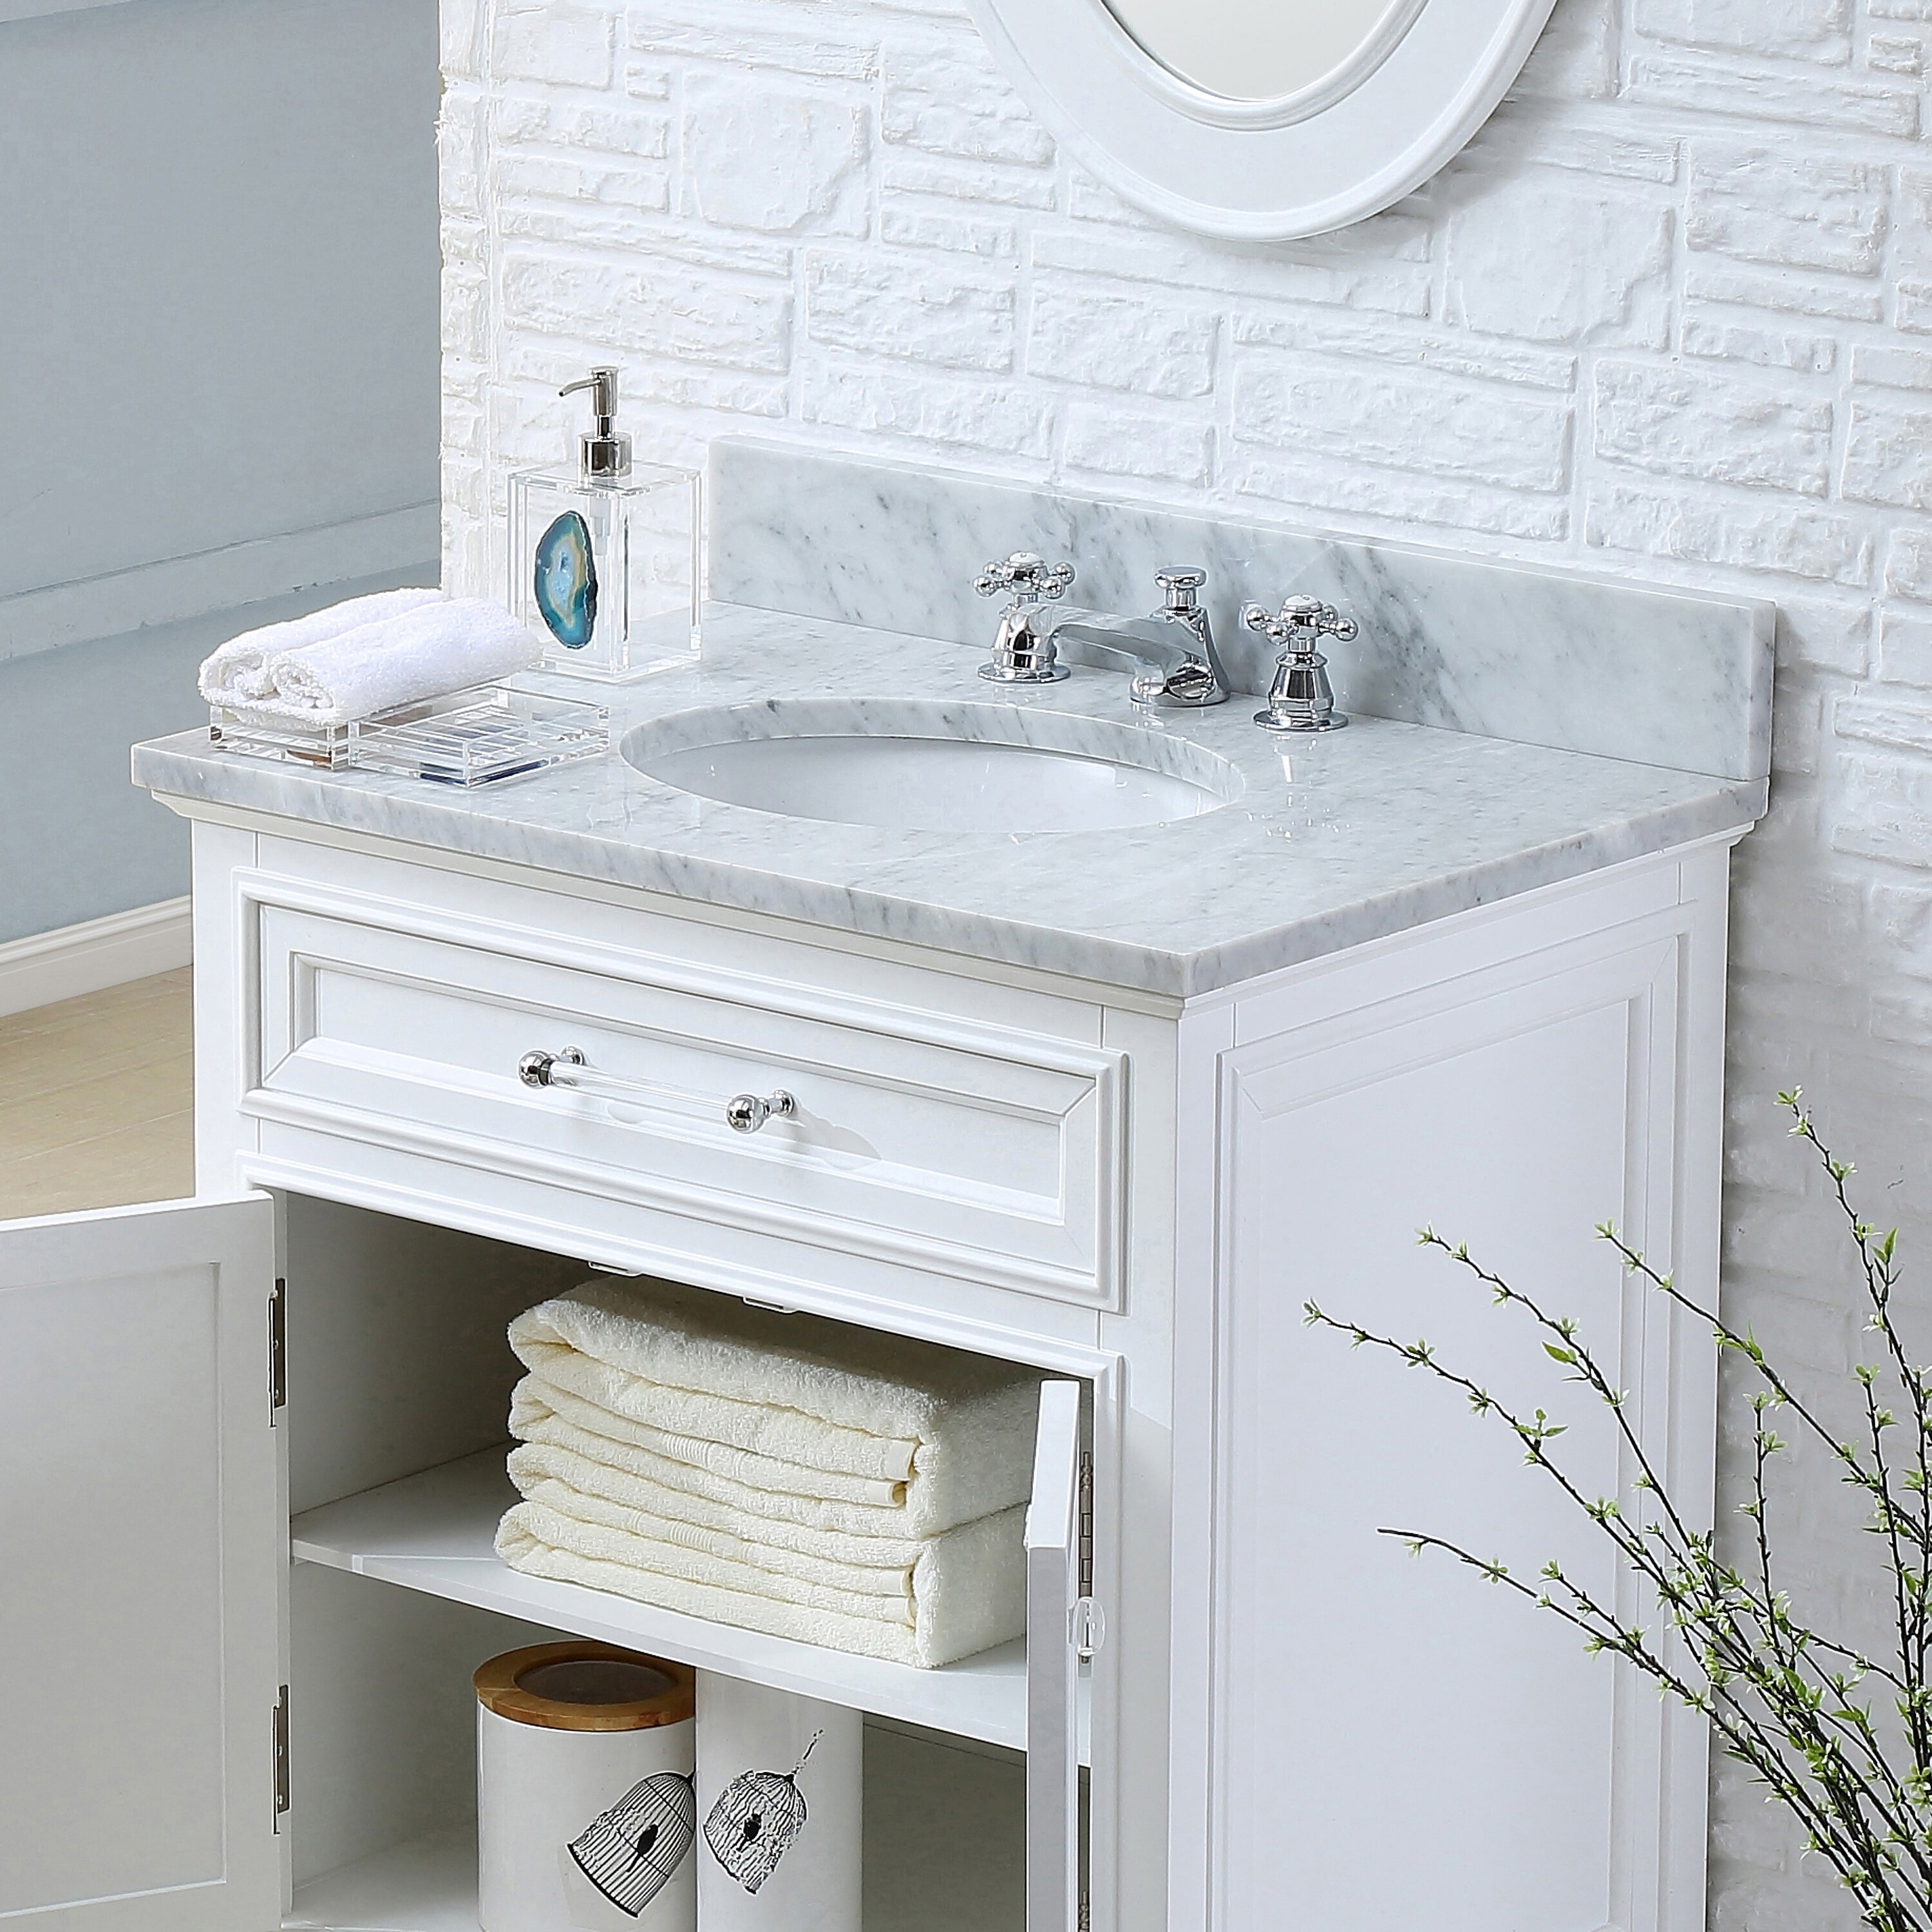 Darby Home Co Colchester 30 Single Sink Bathroom Vanity Set White And Reviews Wayfair 2888